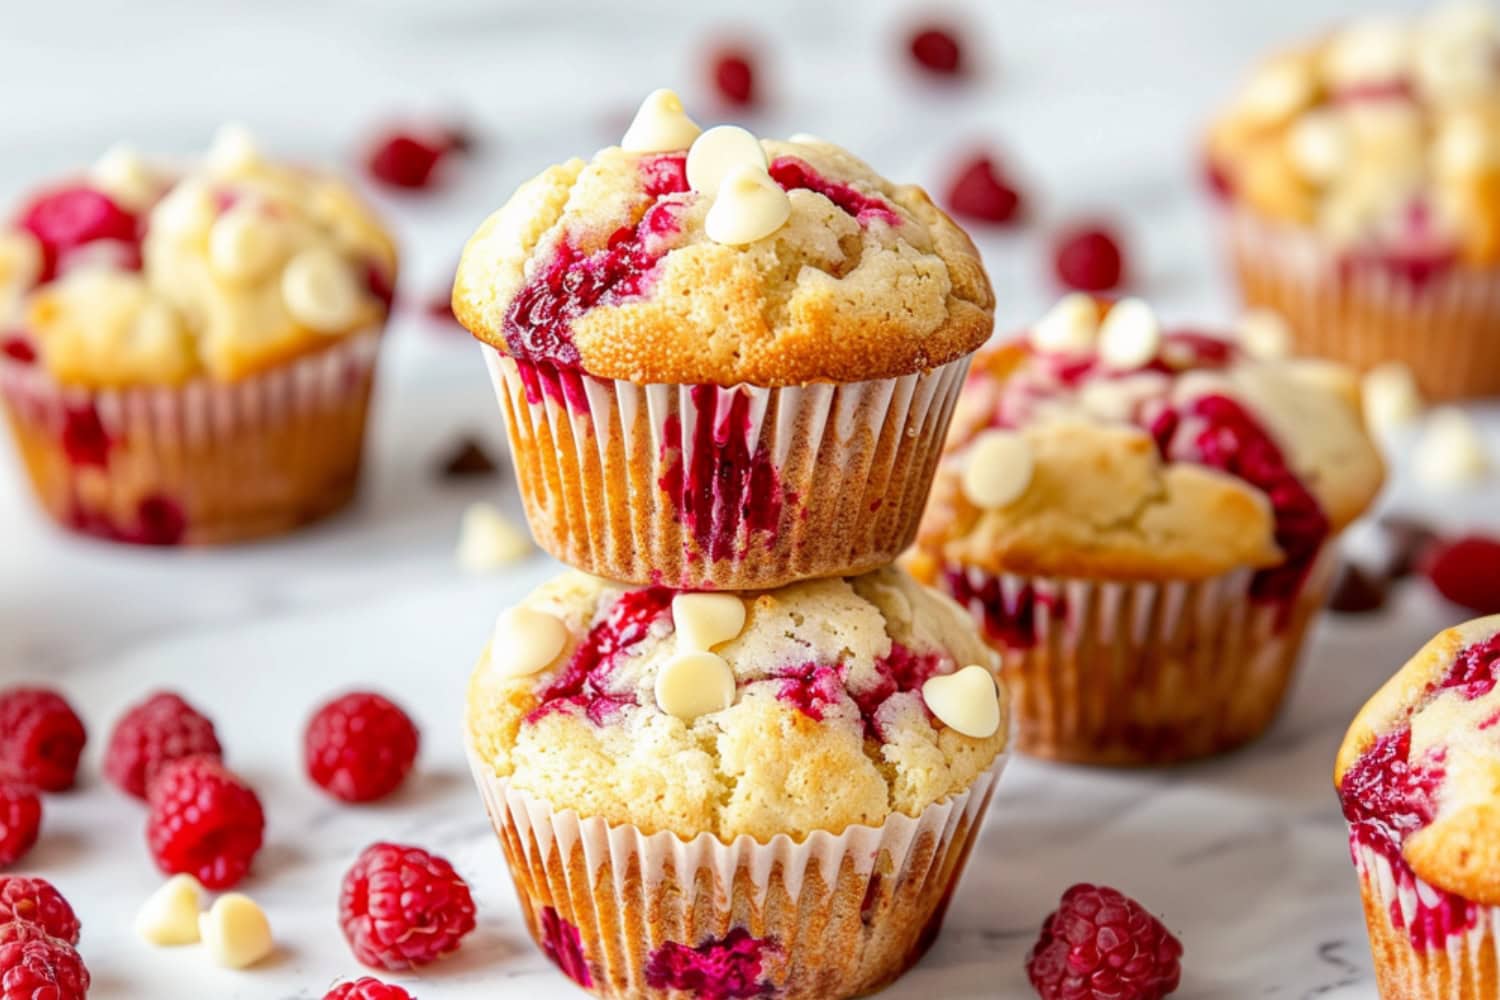 Muffins with white chocolate and raspberries stack on each other.